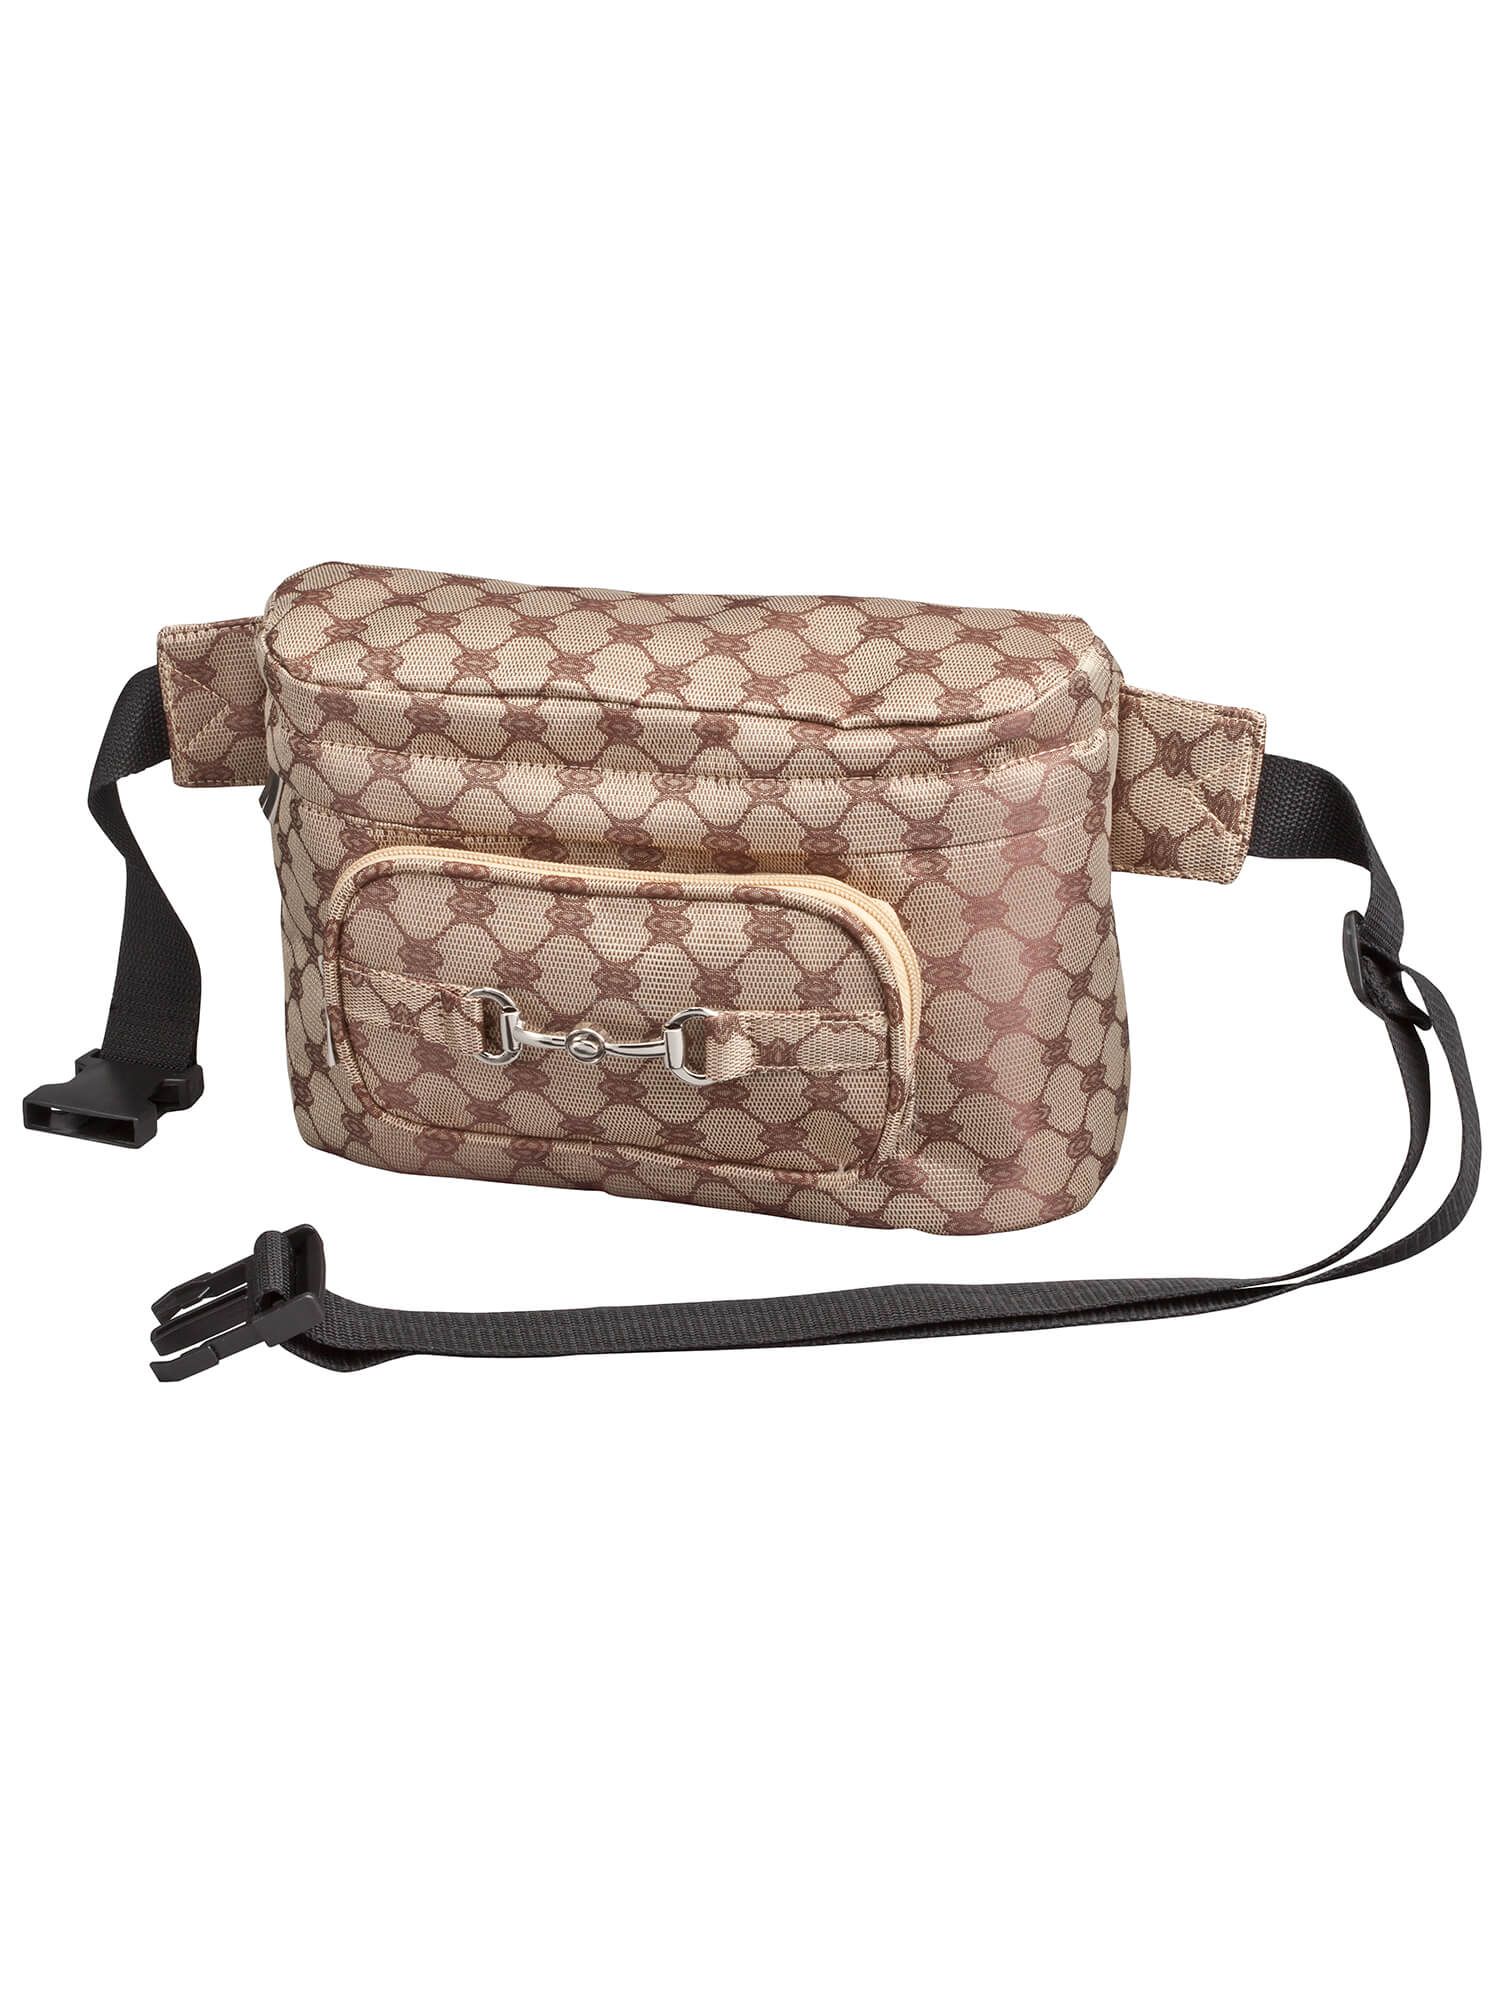 The Fashion Pack, Fanny Pack with Multiple Zipper Pockets and Adjustable Waist Belt, Stylish Tan ... | Walmart (US)